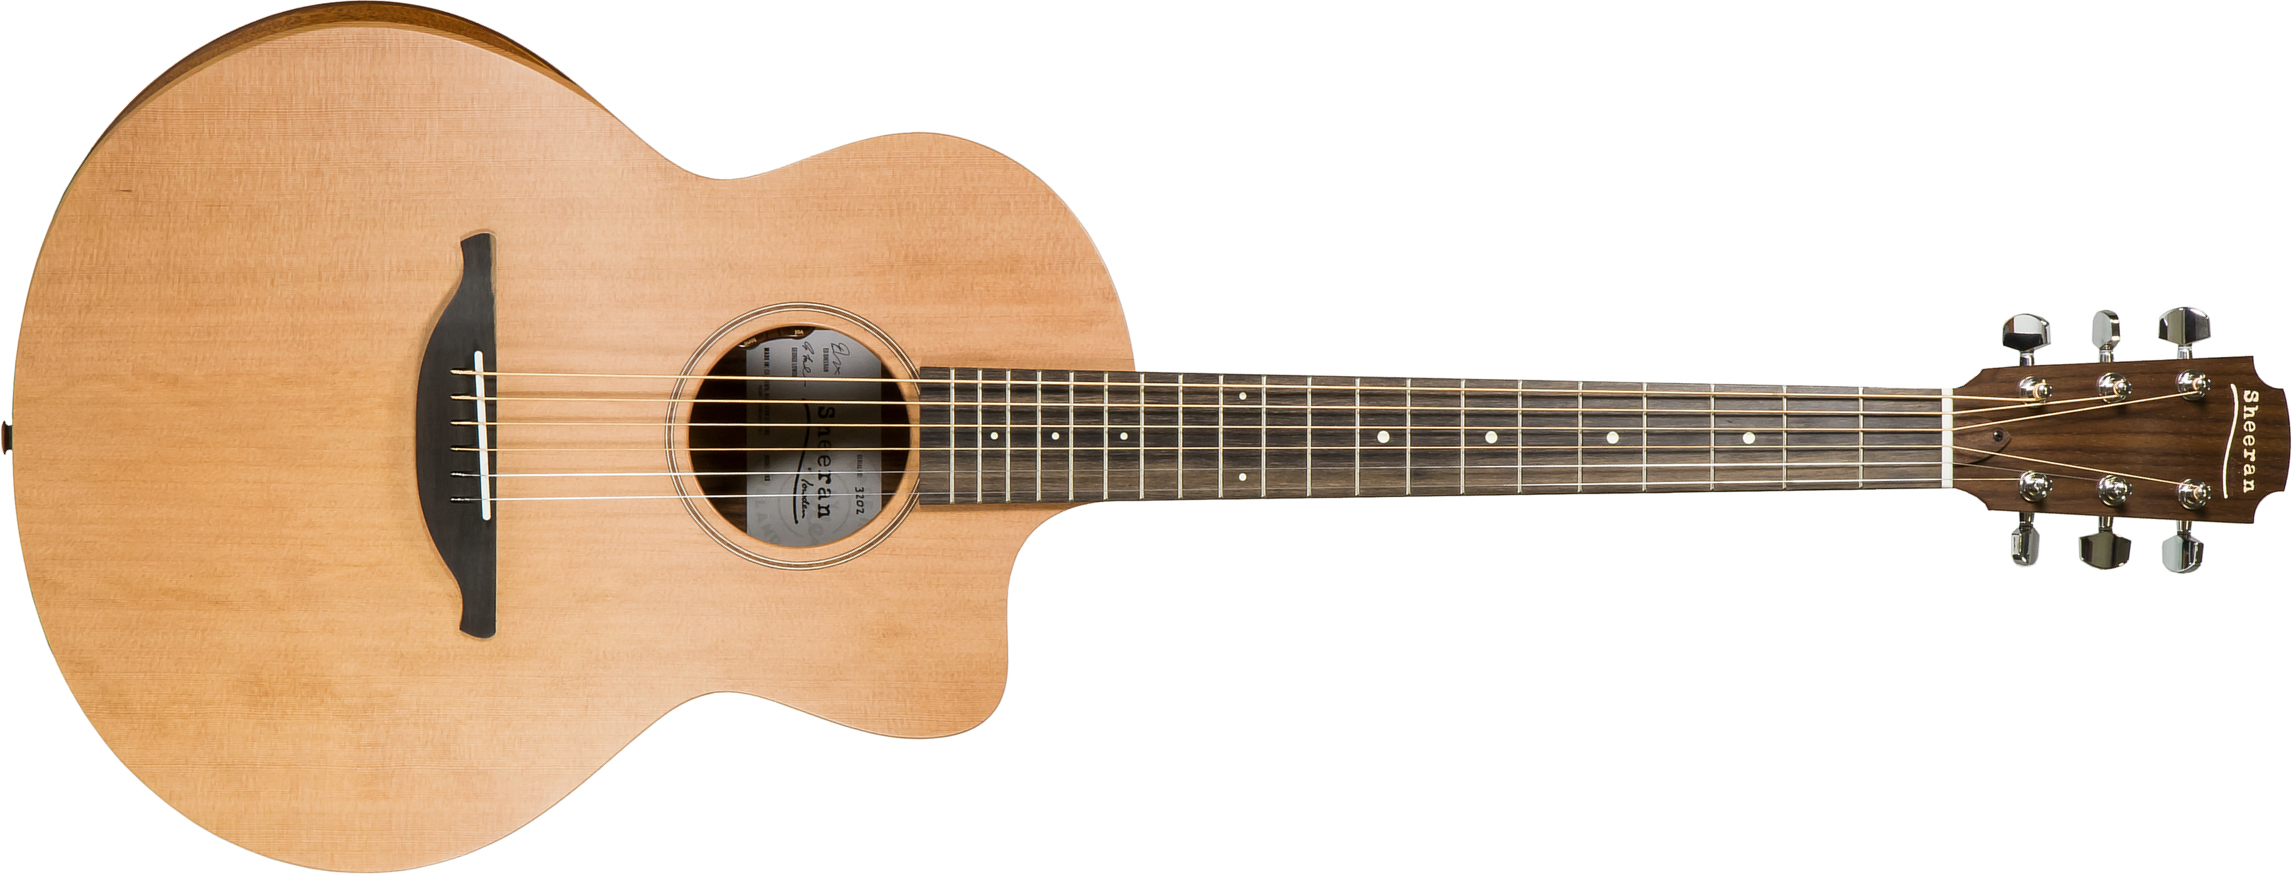 Sheeran By Lowden S03 Orchestra Model Cedre Palissandre Eb +housse - Natural Satin - Guitare Acoustique - Main picture